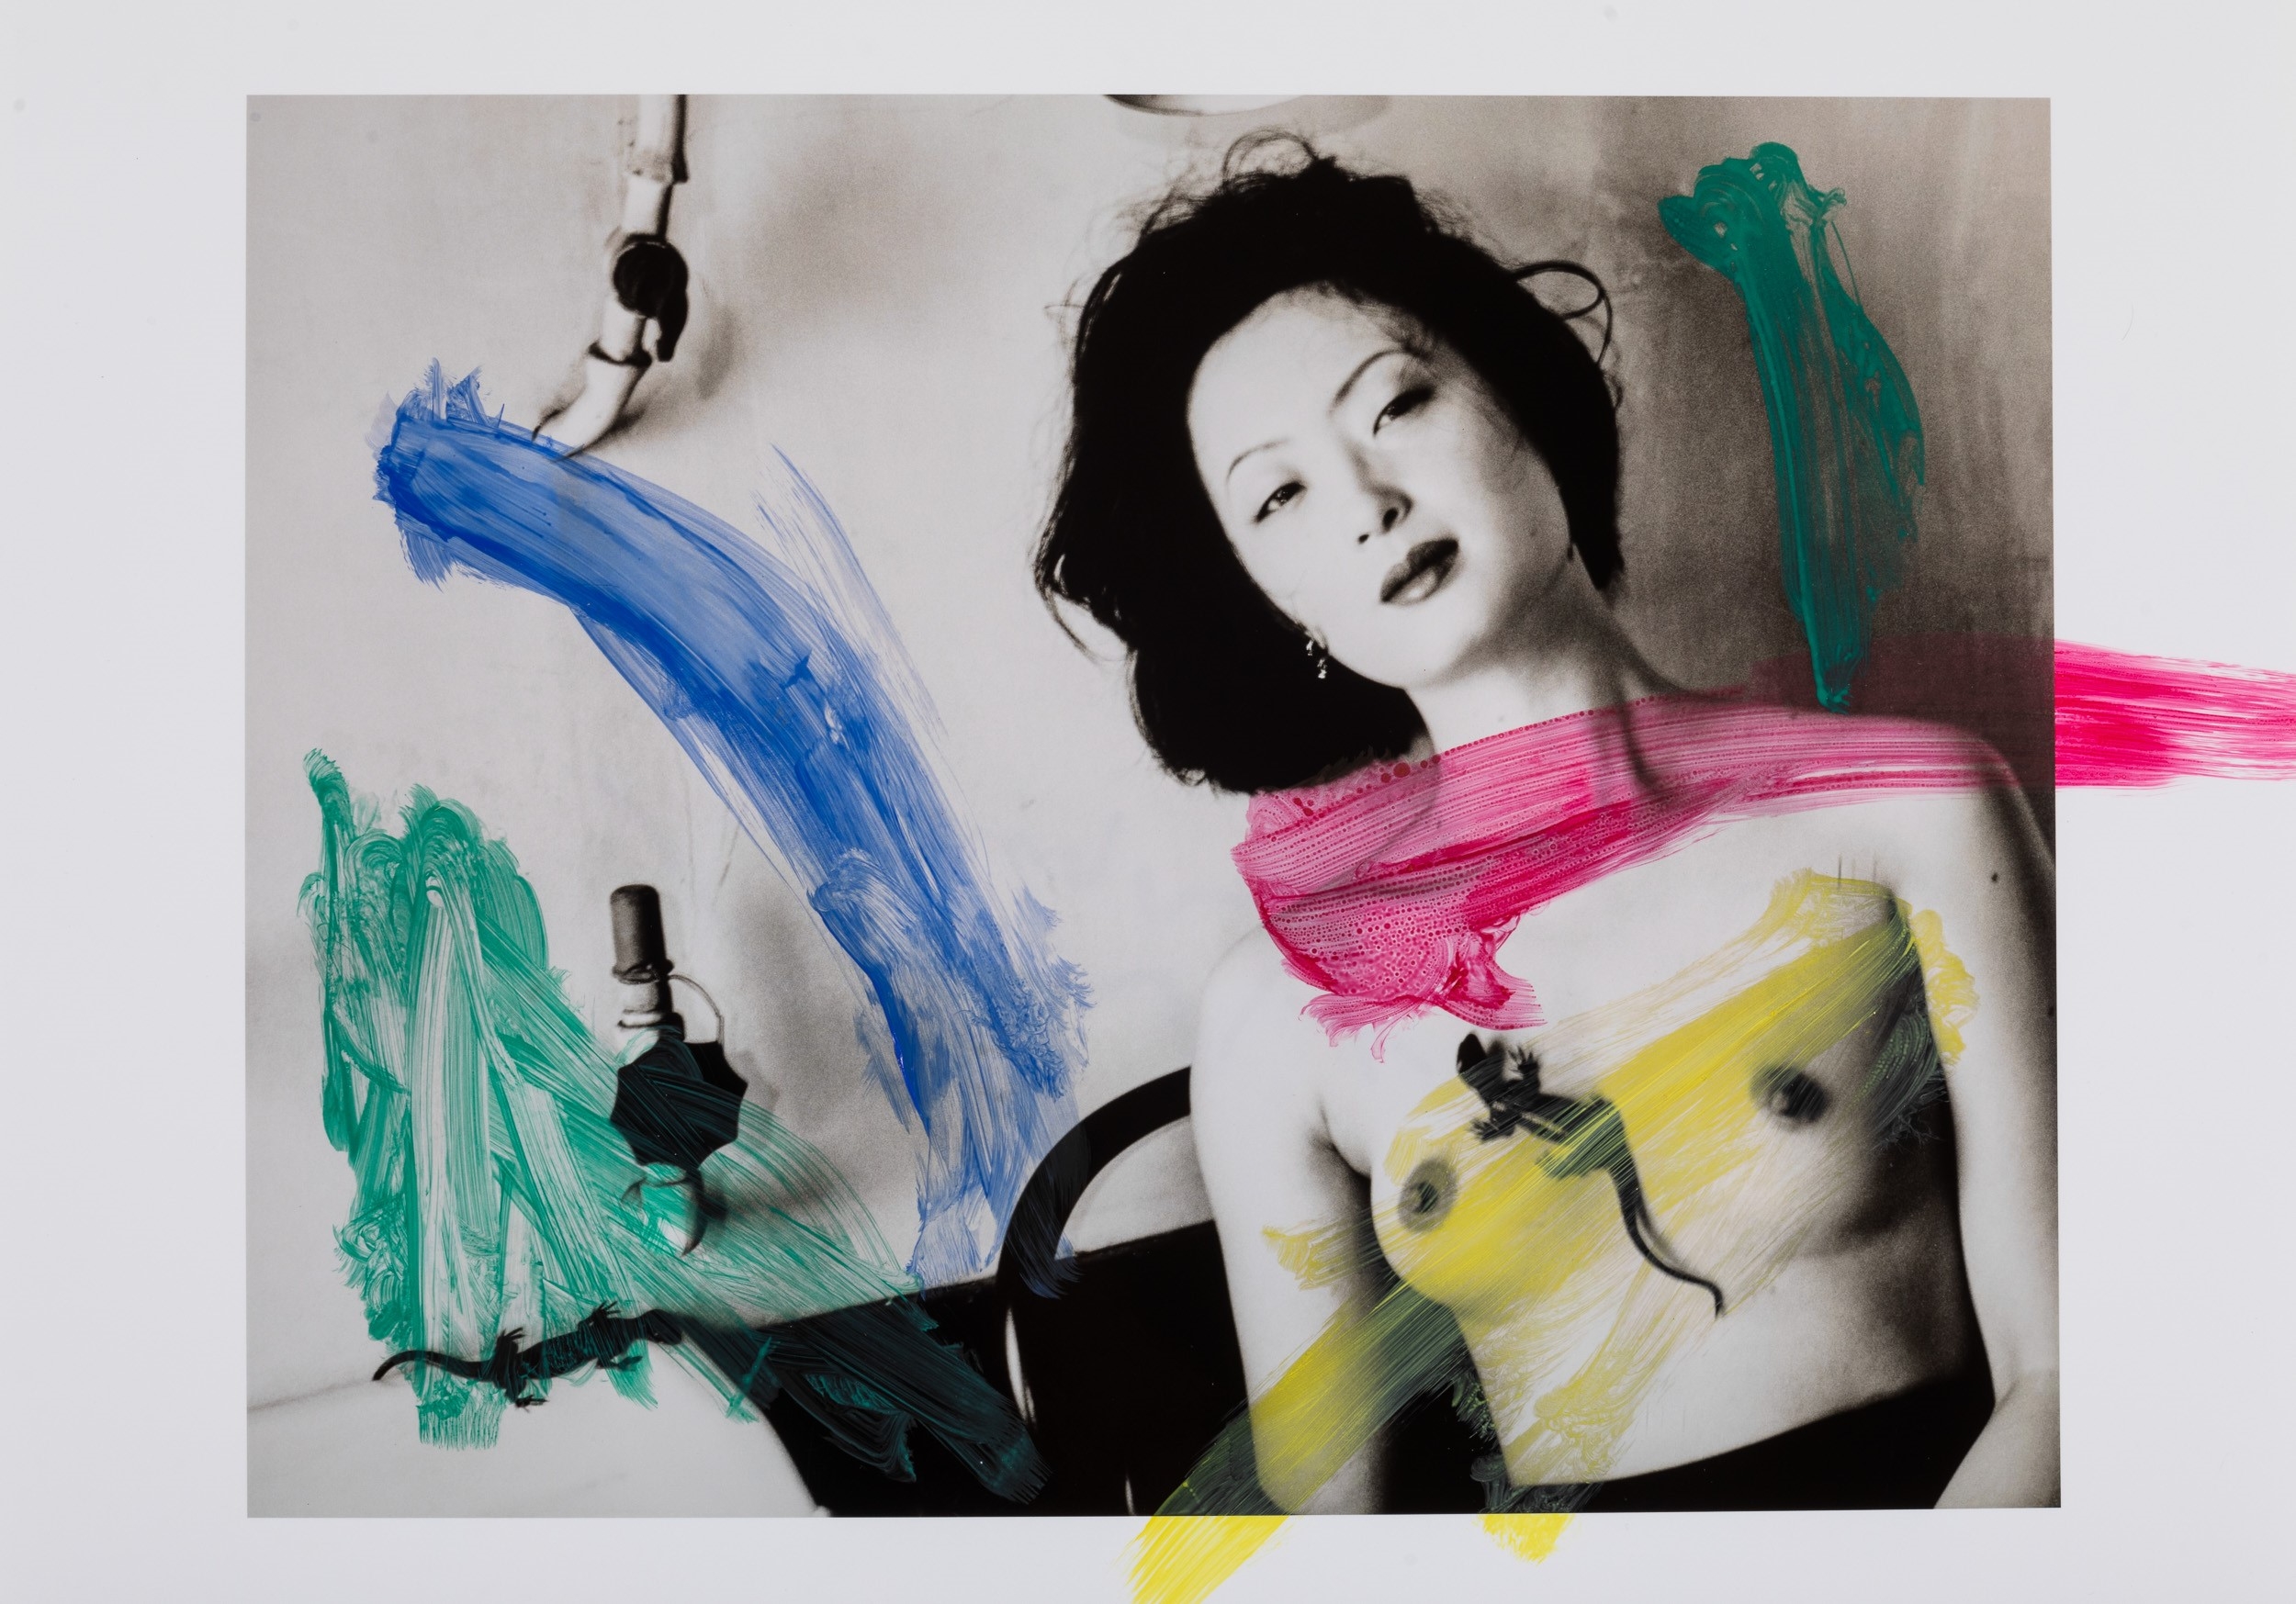 Artwork by Nobuyoshi Araki, Untitled, Made of Gelatin silver print with pictorial intervention